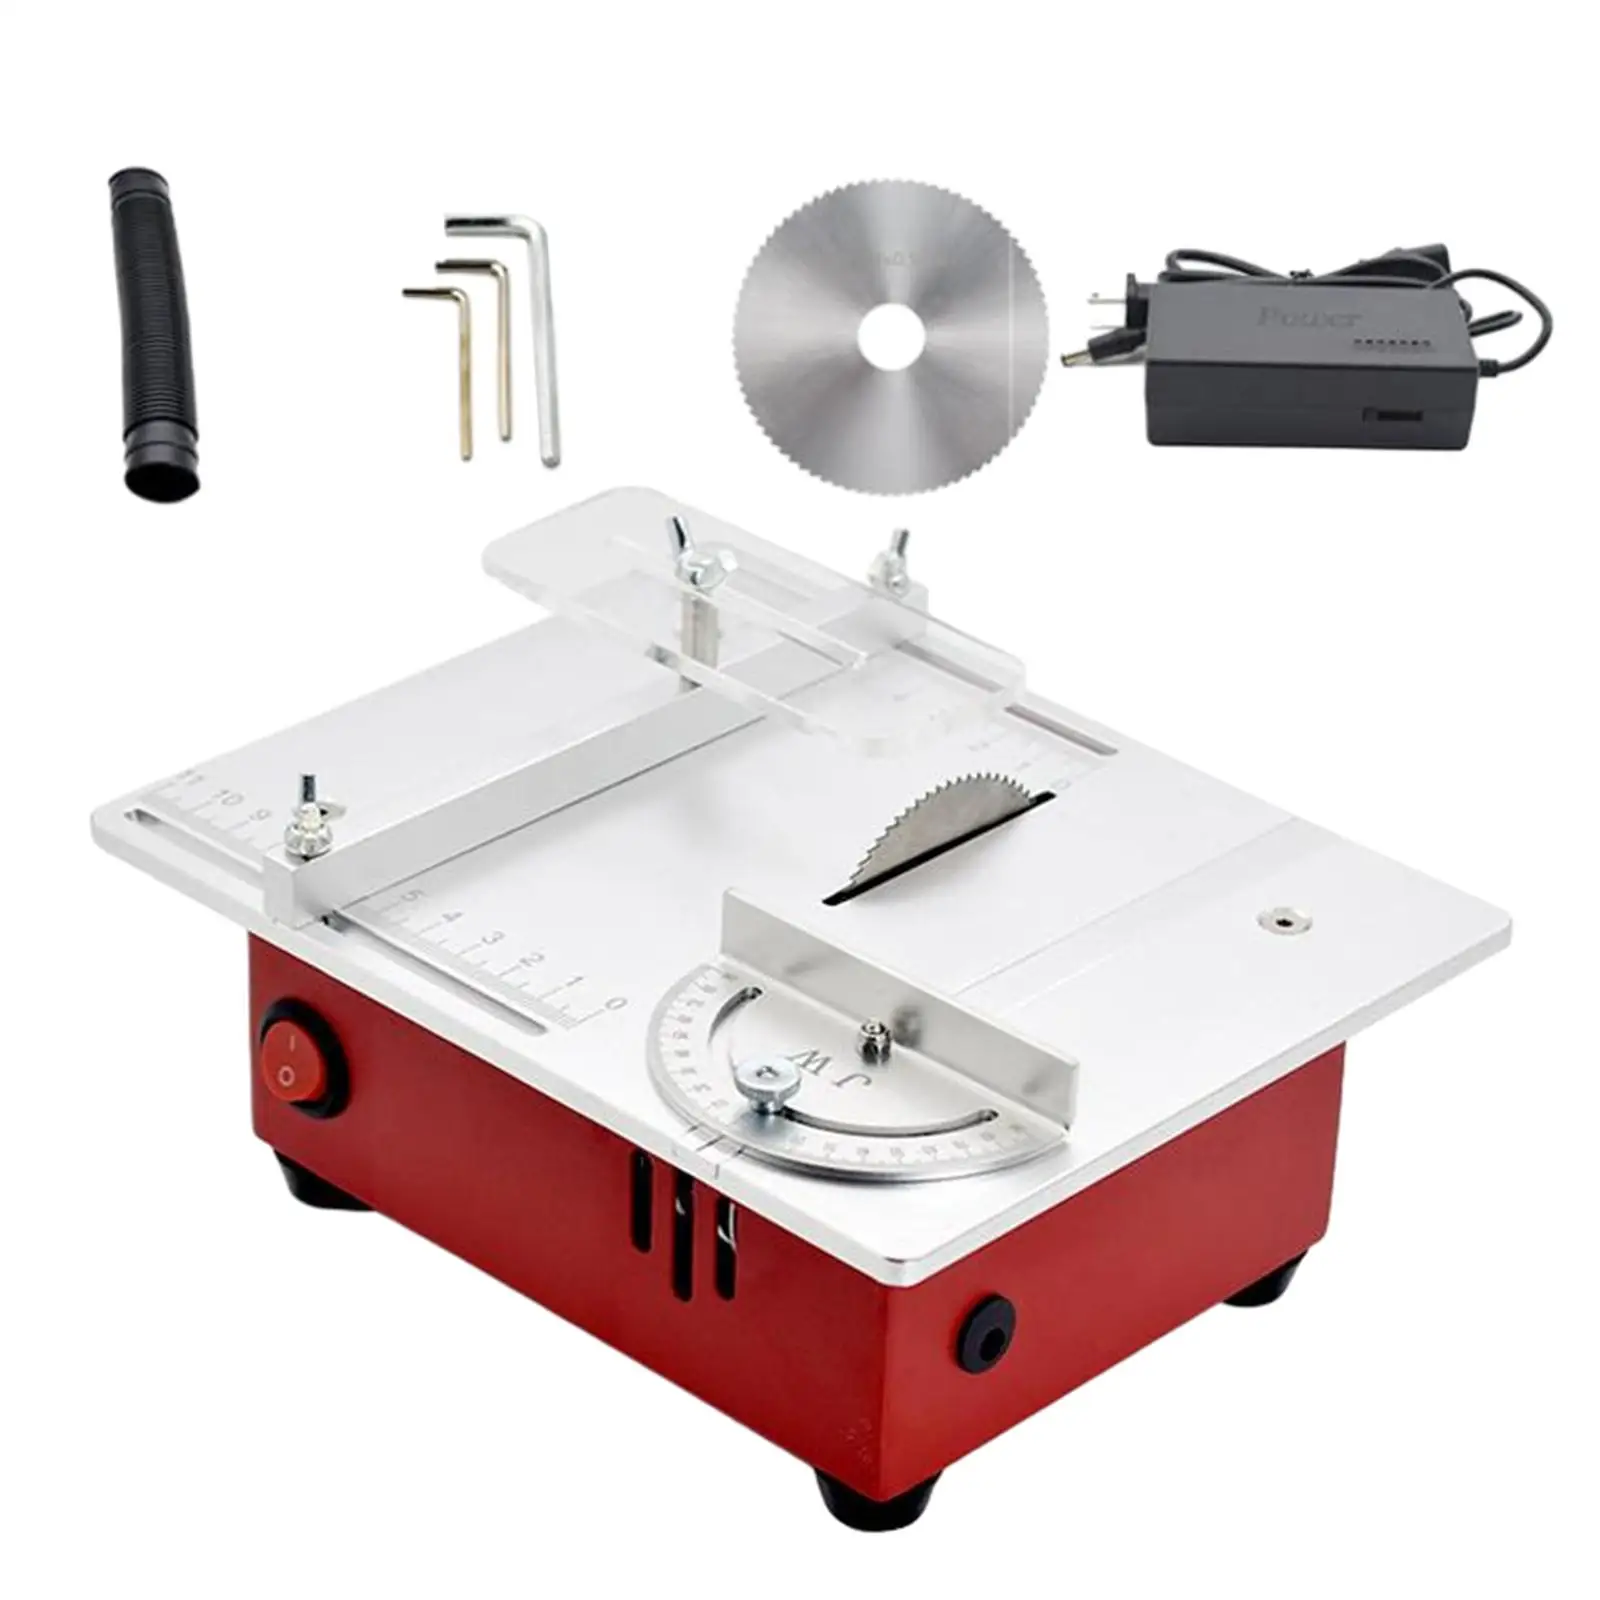 Mini Table Saw 7 Level Speed Electric Cutting Machine for Plastic Wood Aluminum Copper Acrylic Cutting Miniature Wood Crafts